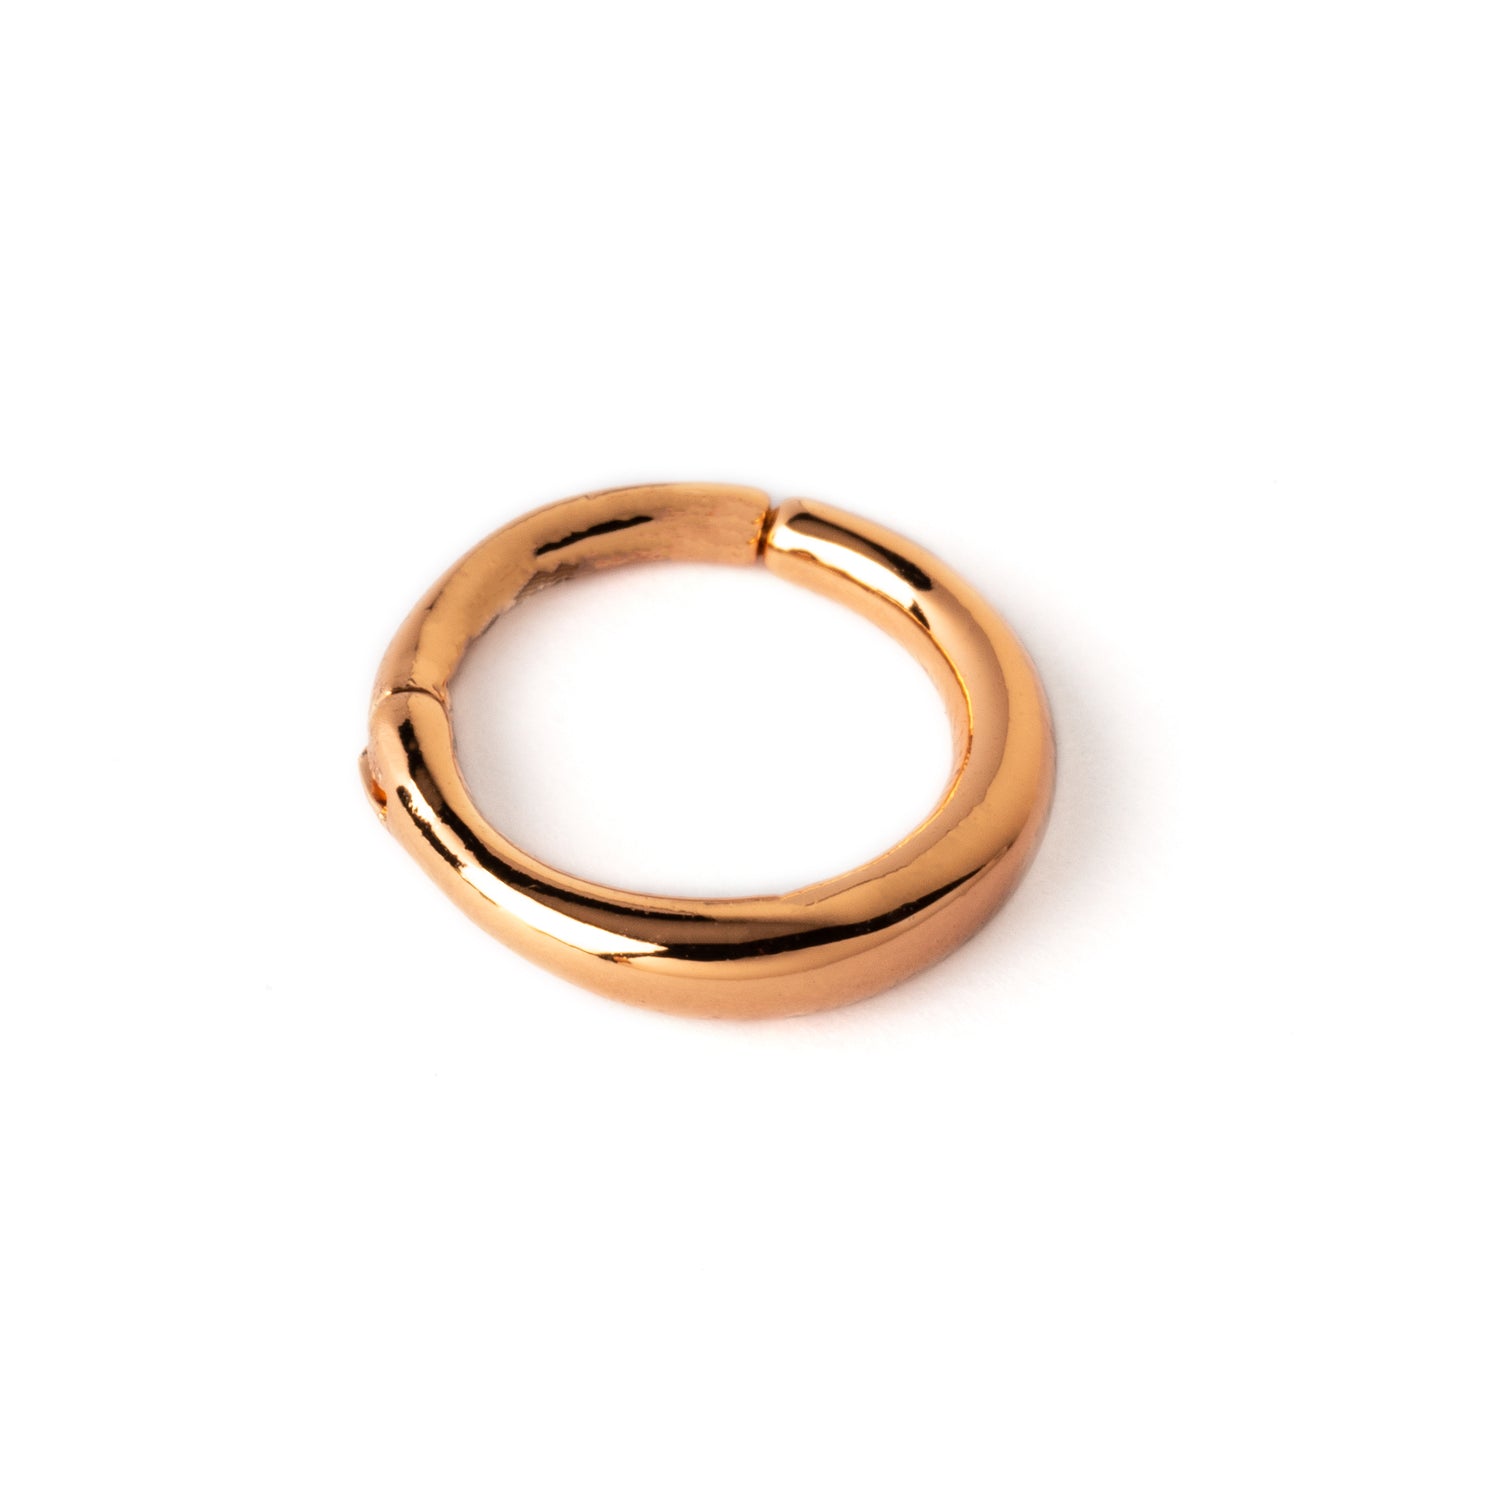 Raja rose gold surgical steel septum clicker ring left side view